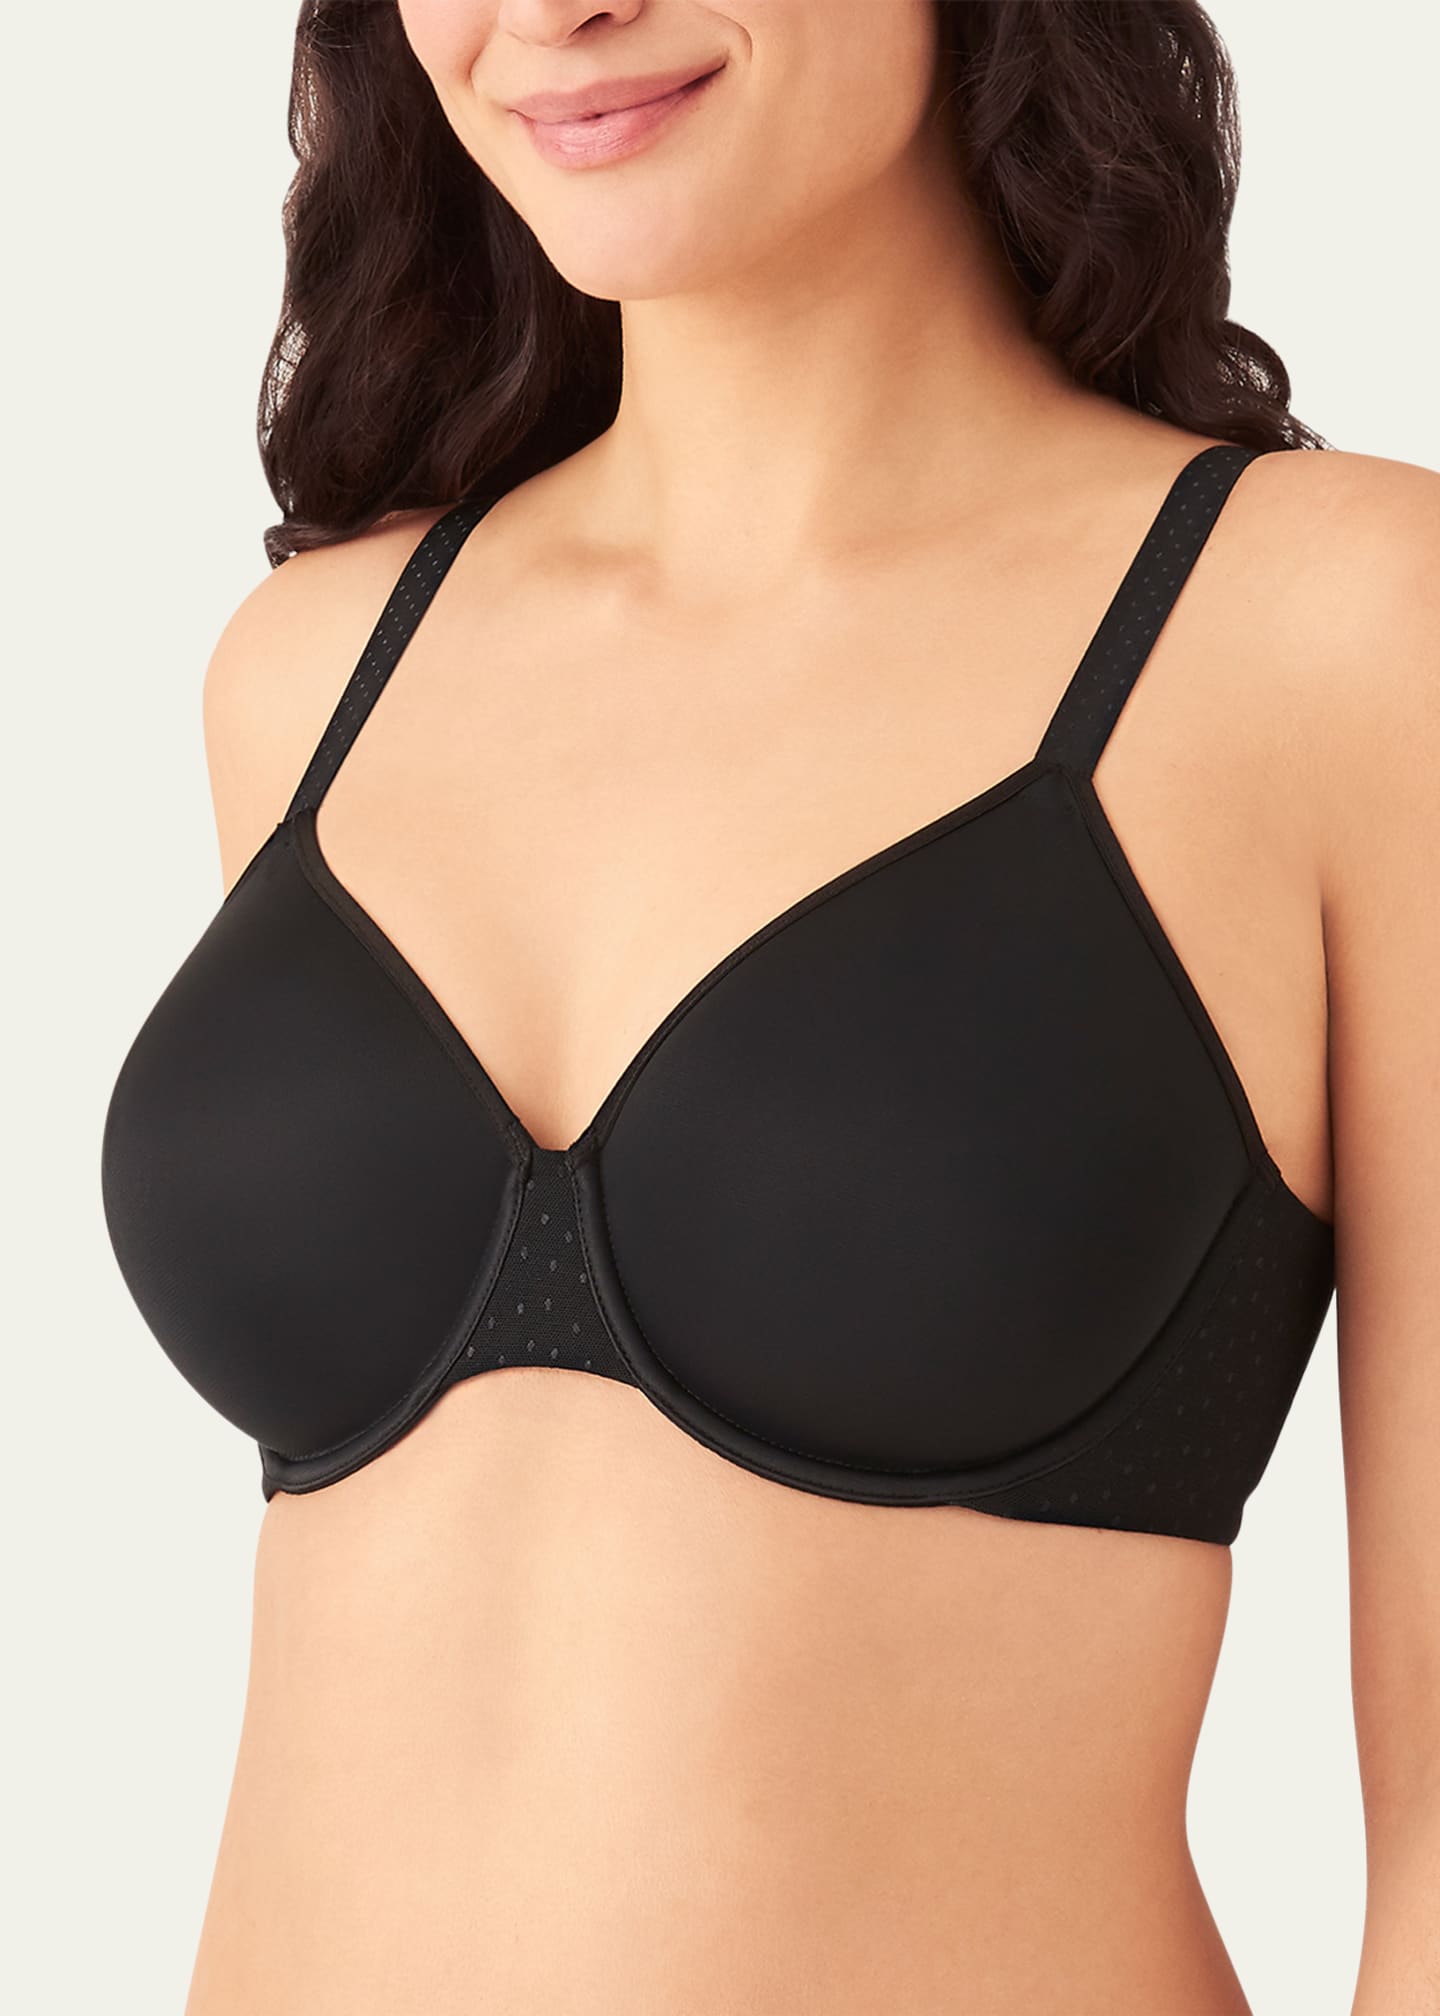 Wacoal Back Appeal Underwire Minimizer Bra Image 3 of 4